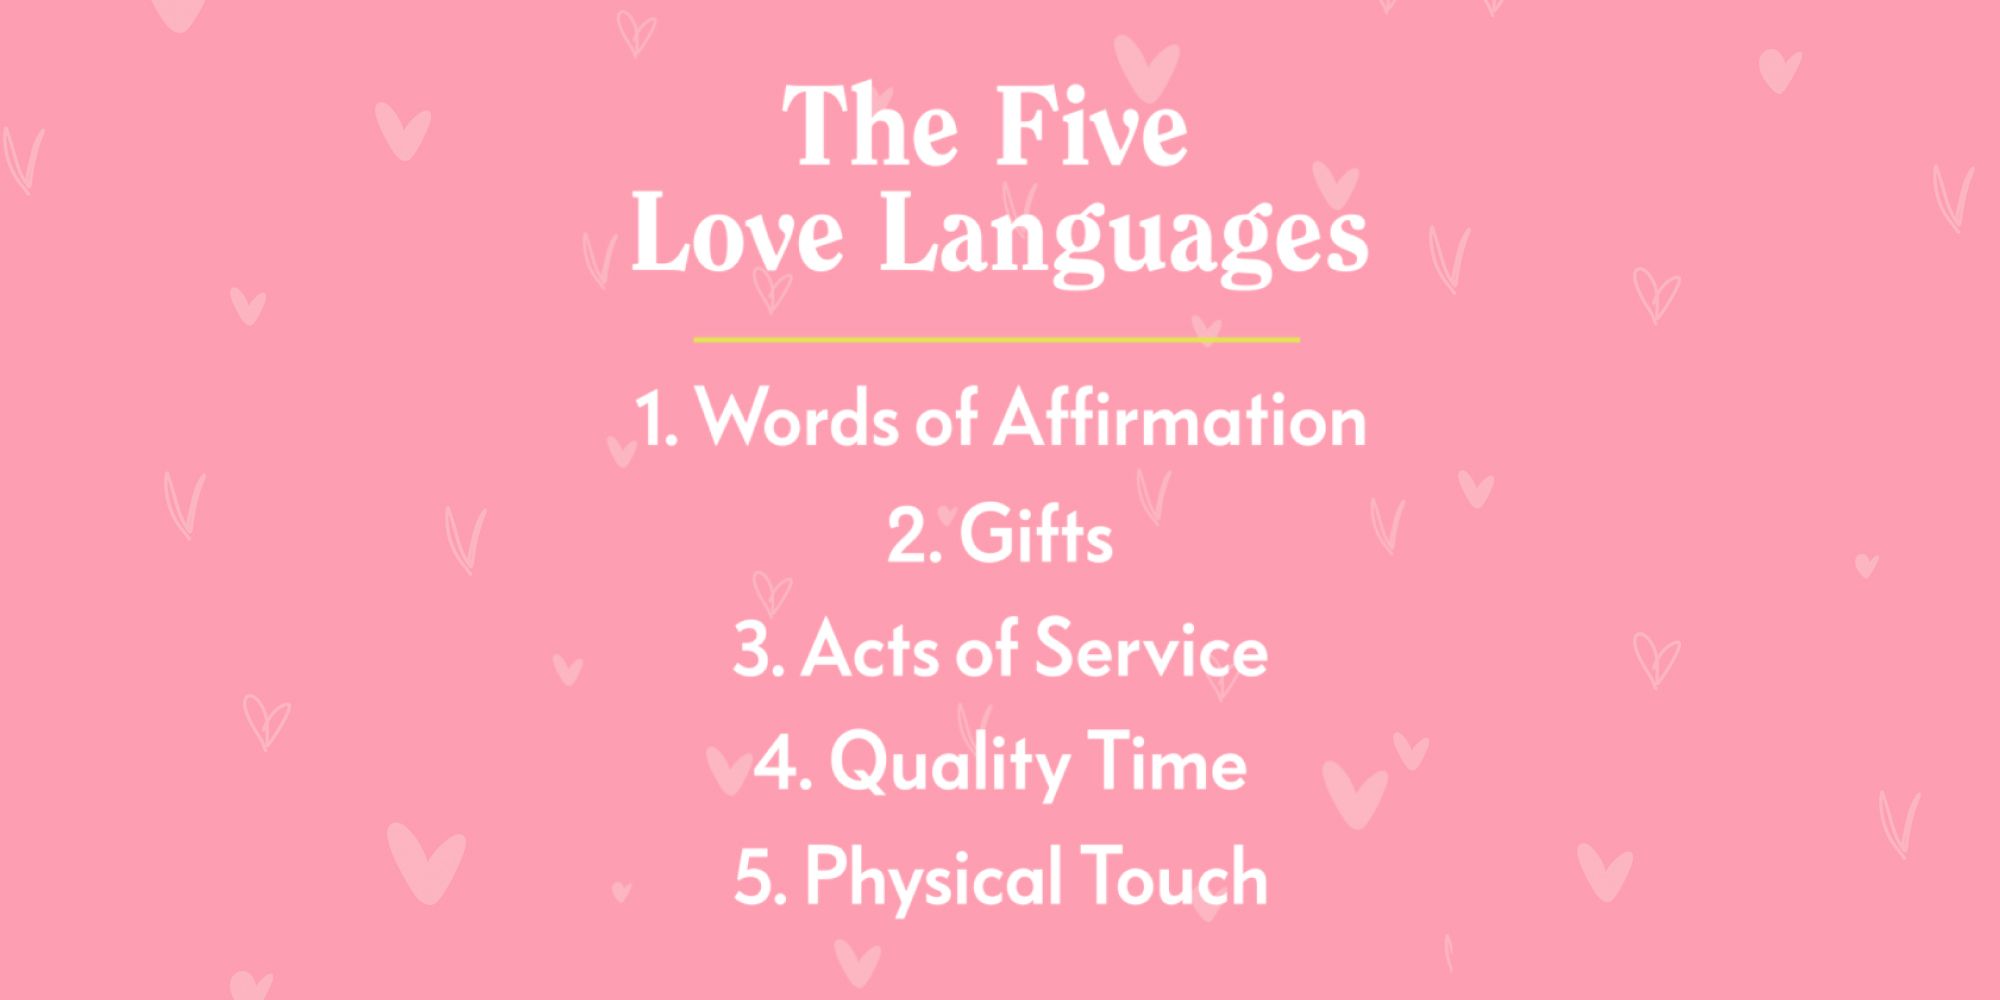 Here Are The Five Love Languages And Their Meanings